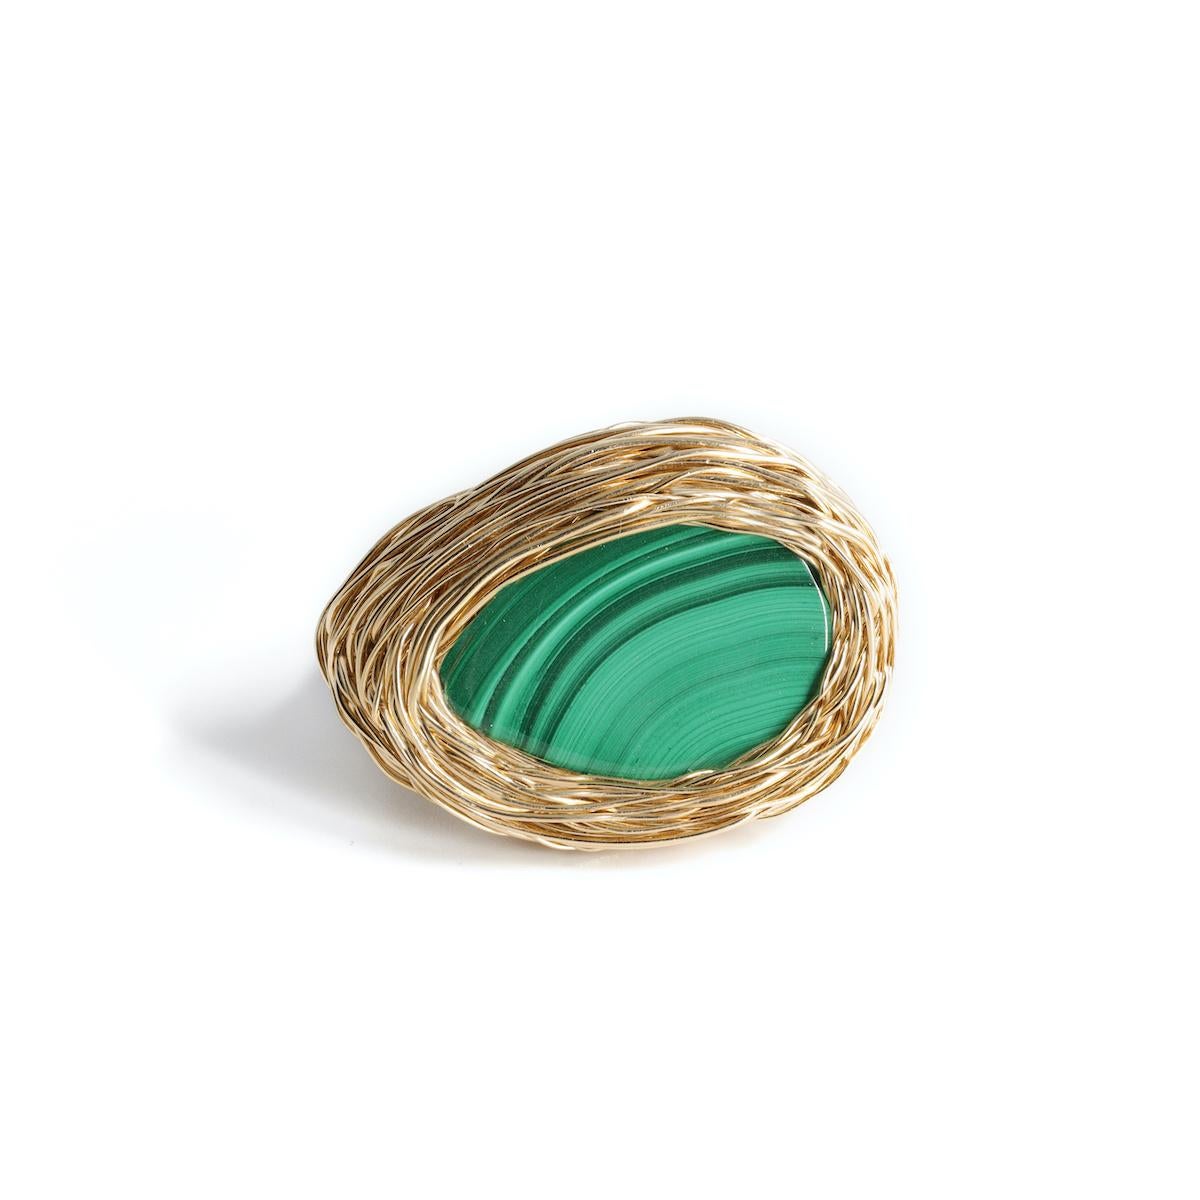 Uncut Malachite Drop Shaped Embrace Cocktail Ring in 14 K Yellow Gold F. by the Artist For Sale